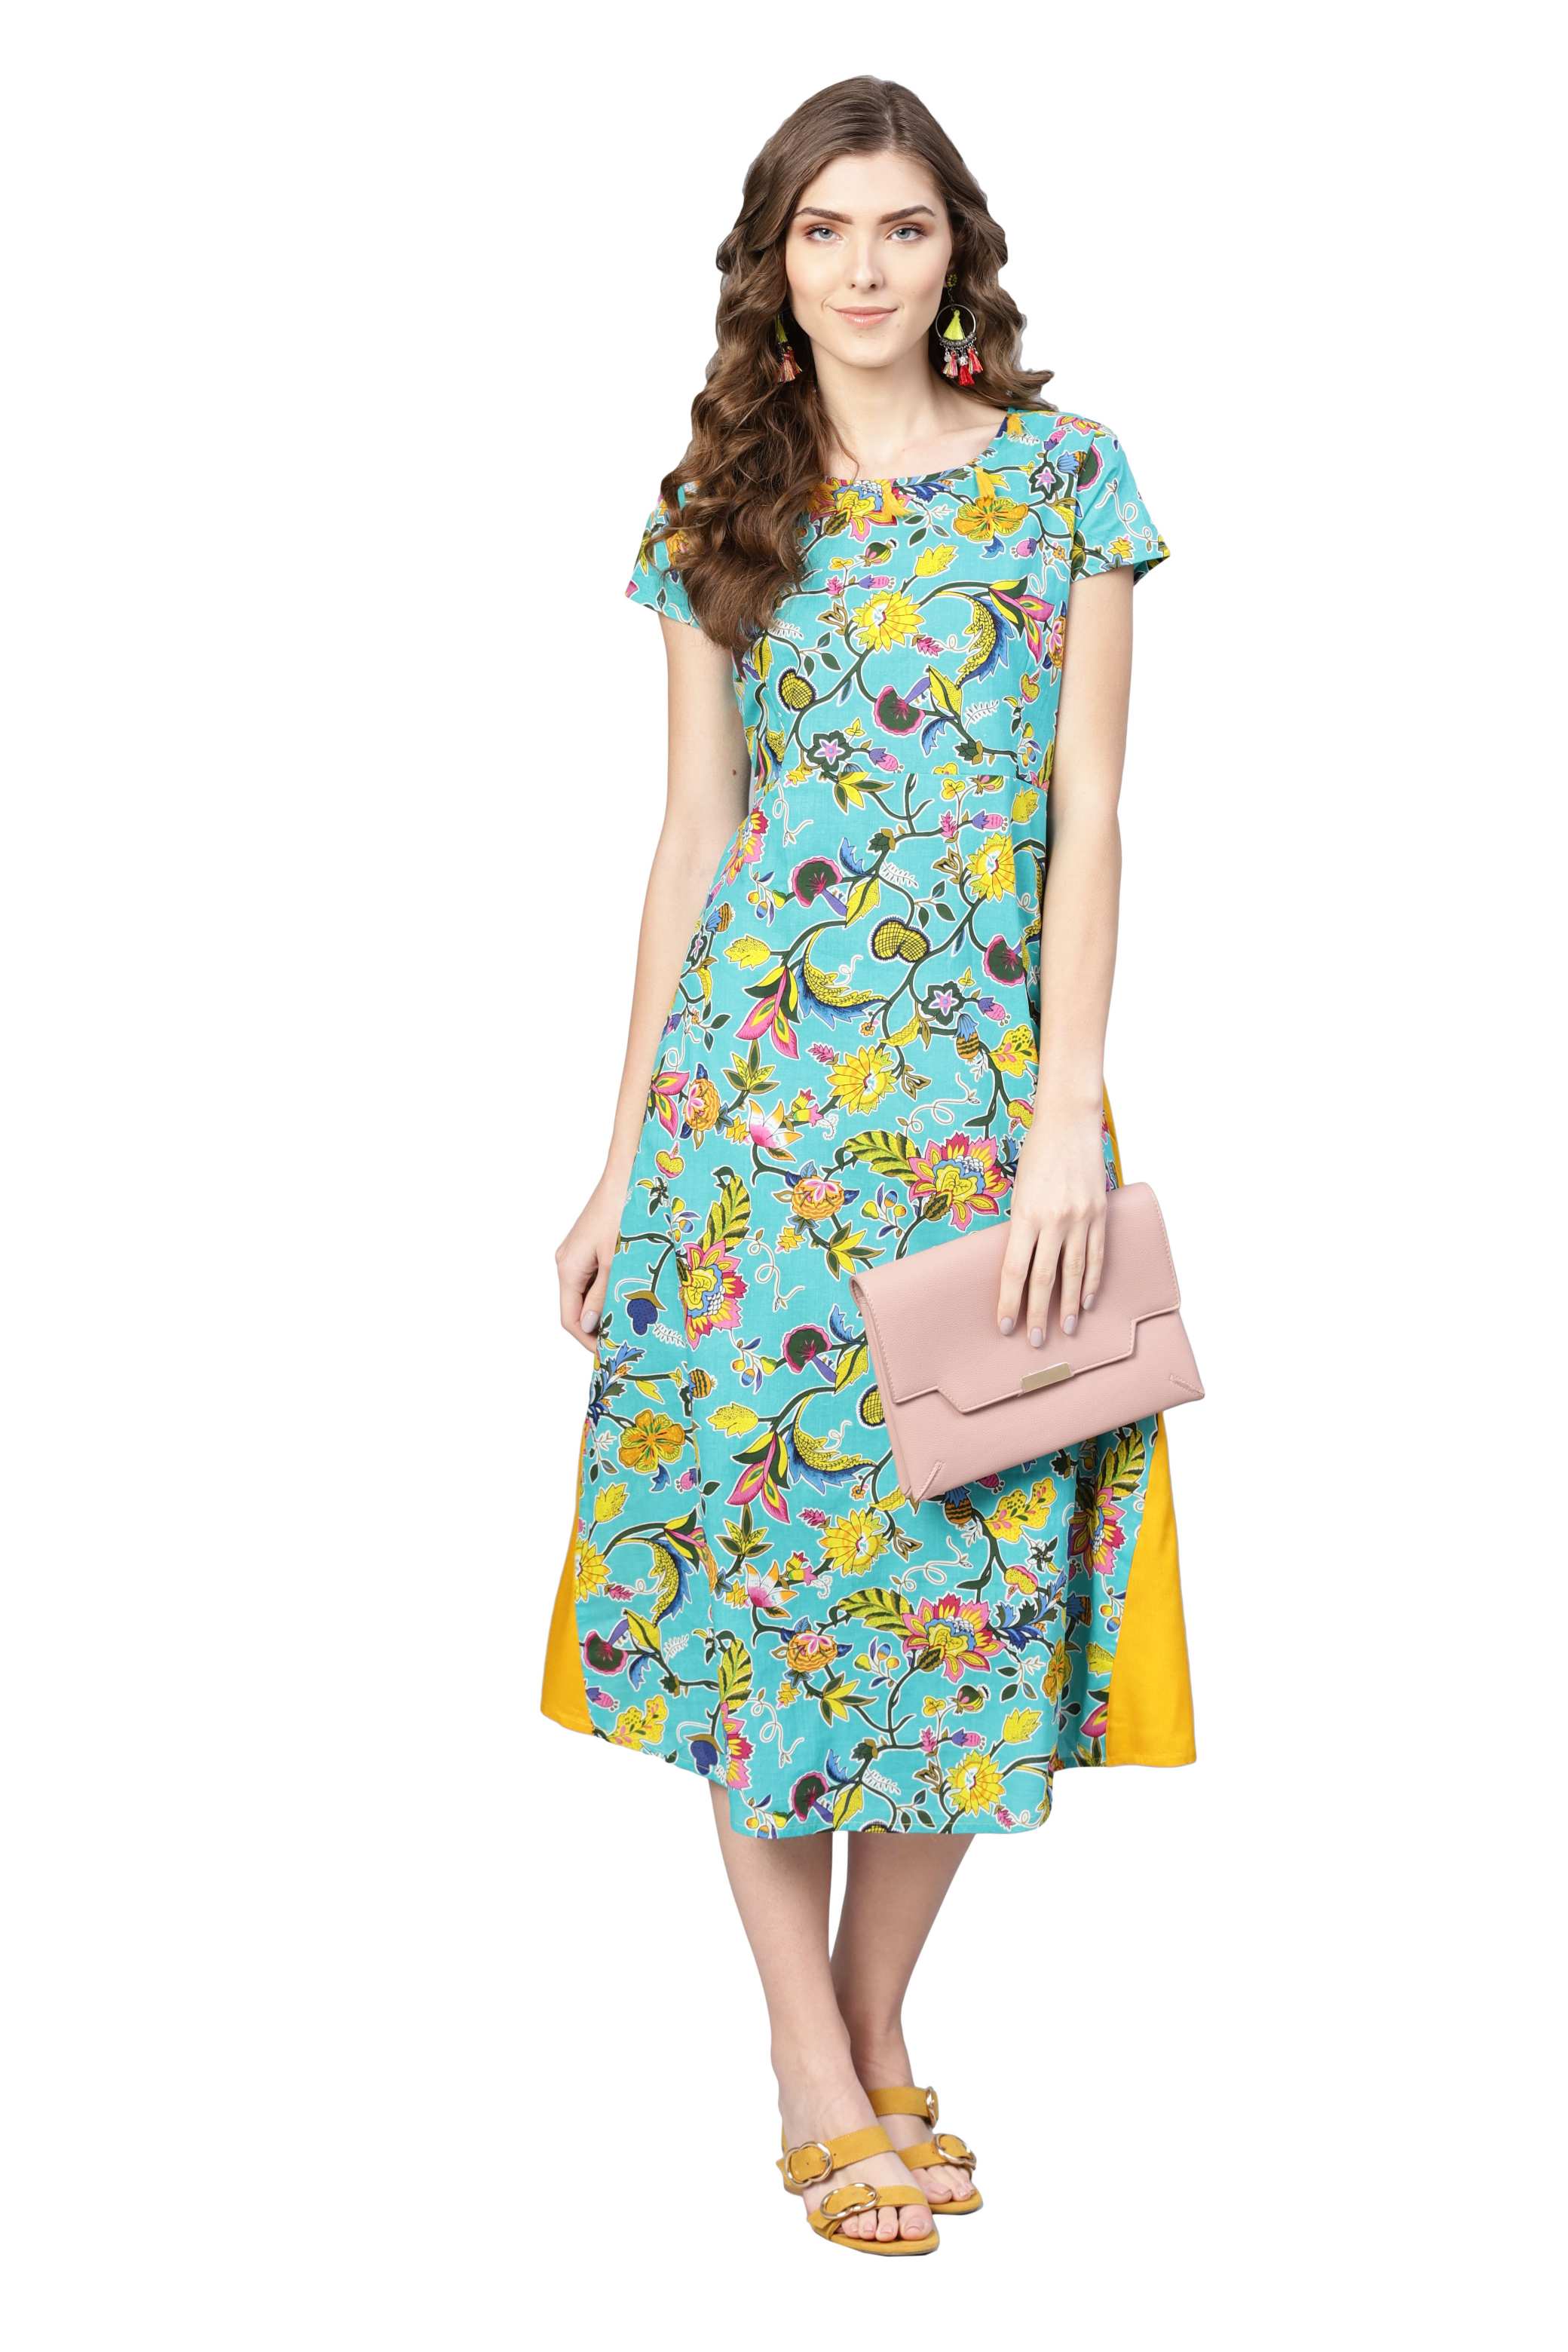 Women's Multi Cotton Printed  Round Neck Dress - Final Clearance Sale